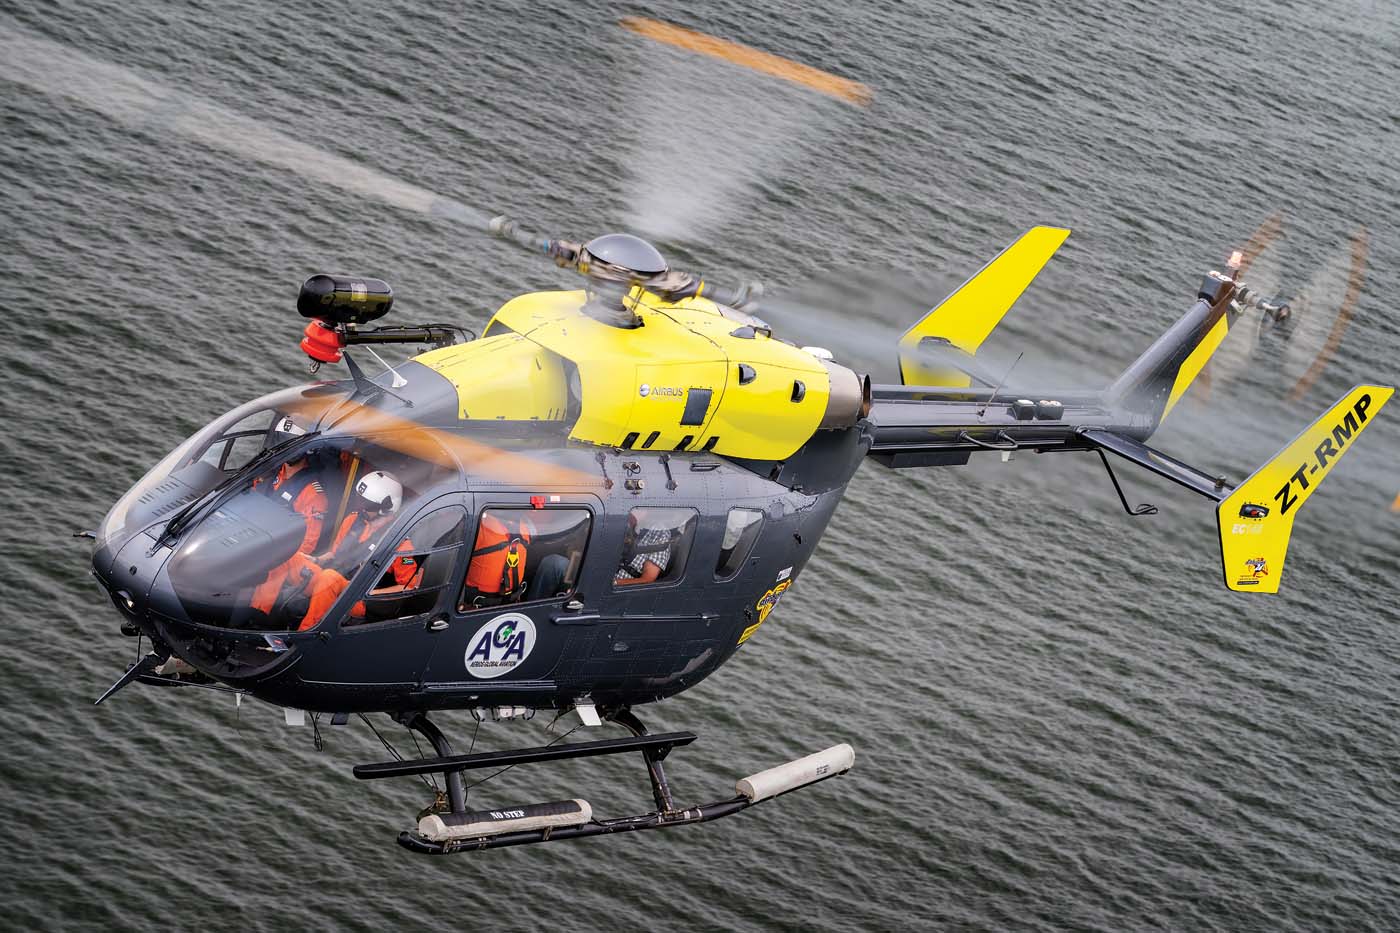 AGA uses an EC145 for most of its offshore missions. The aircraft has an offshore range of up to 100 nm, which allows for around 25 minutes of loiter time, plus fuel reserves. Lloyd Horgan Photo